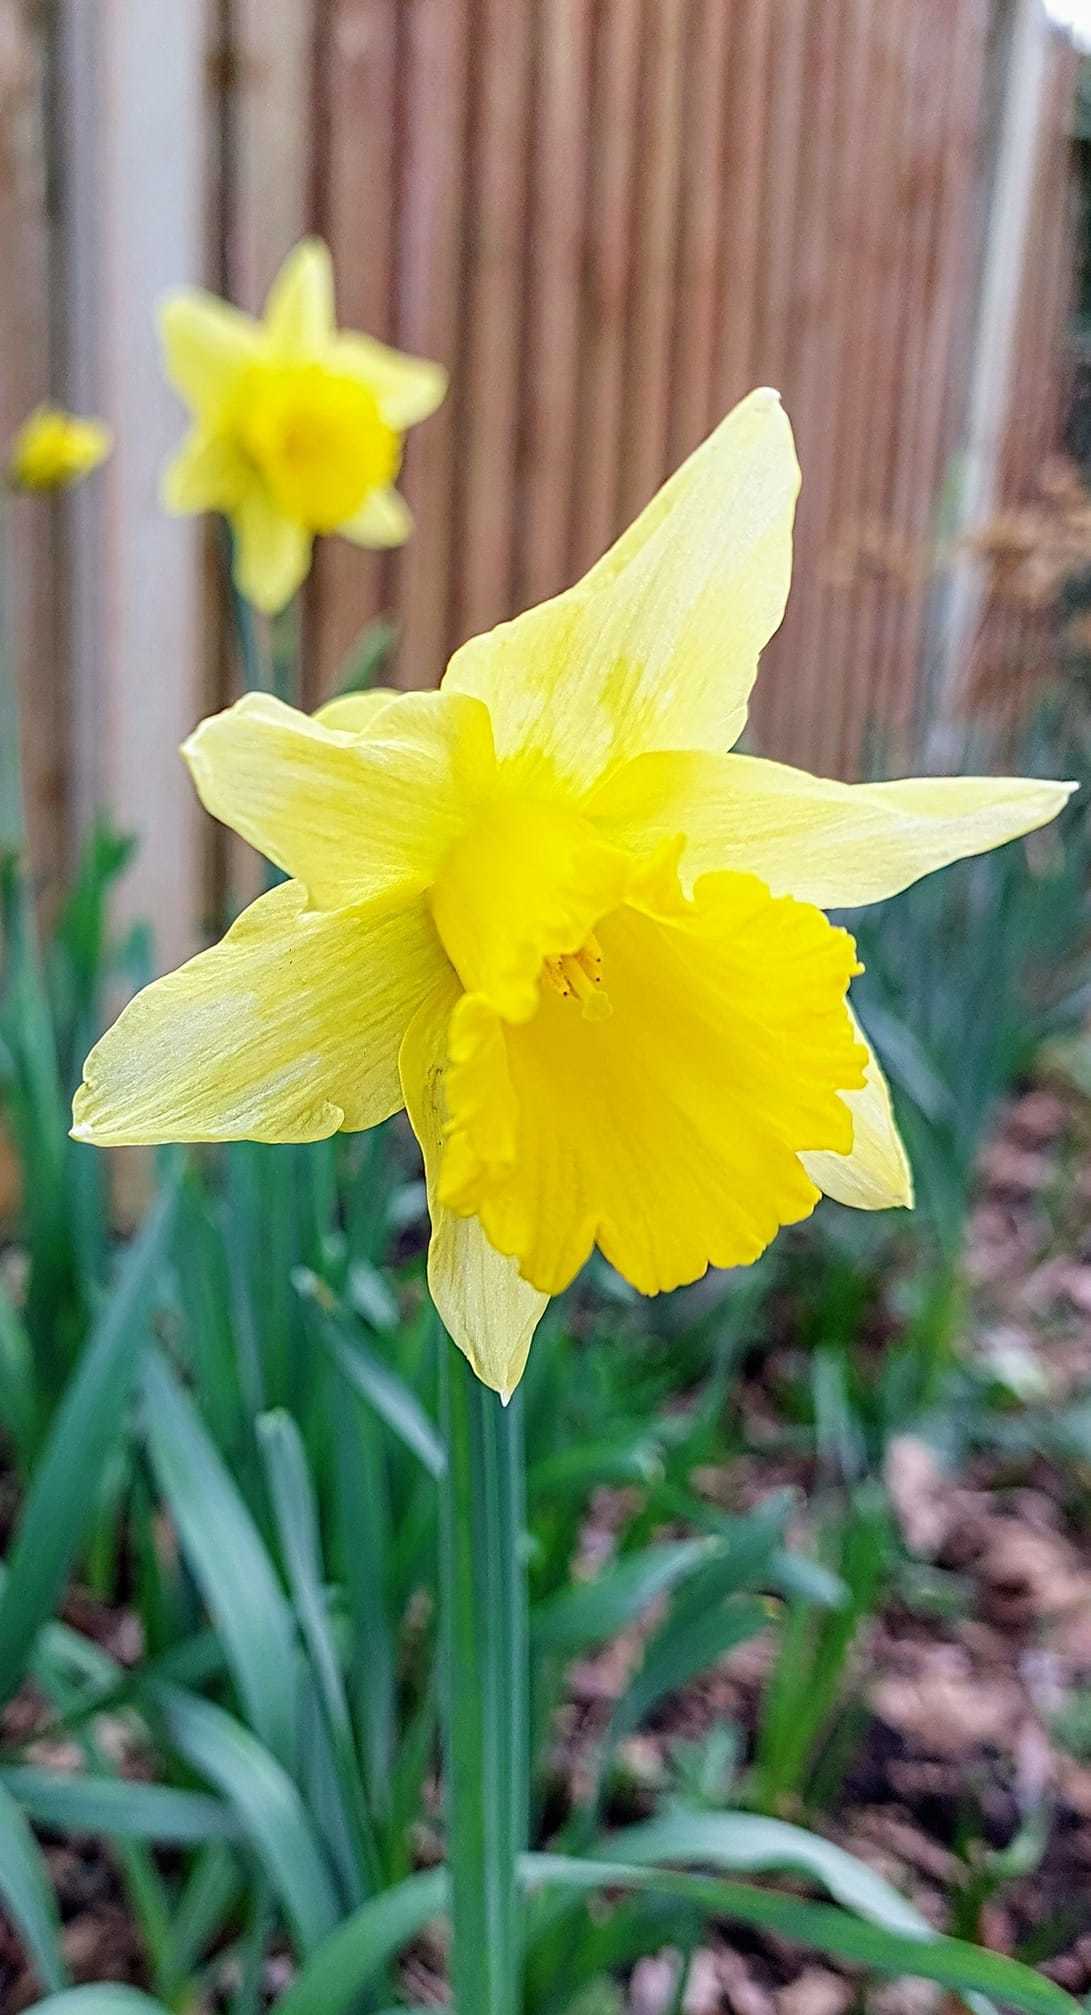 First daffodils by Julie Longshaw